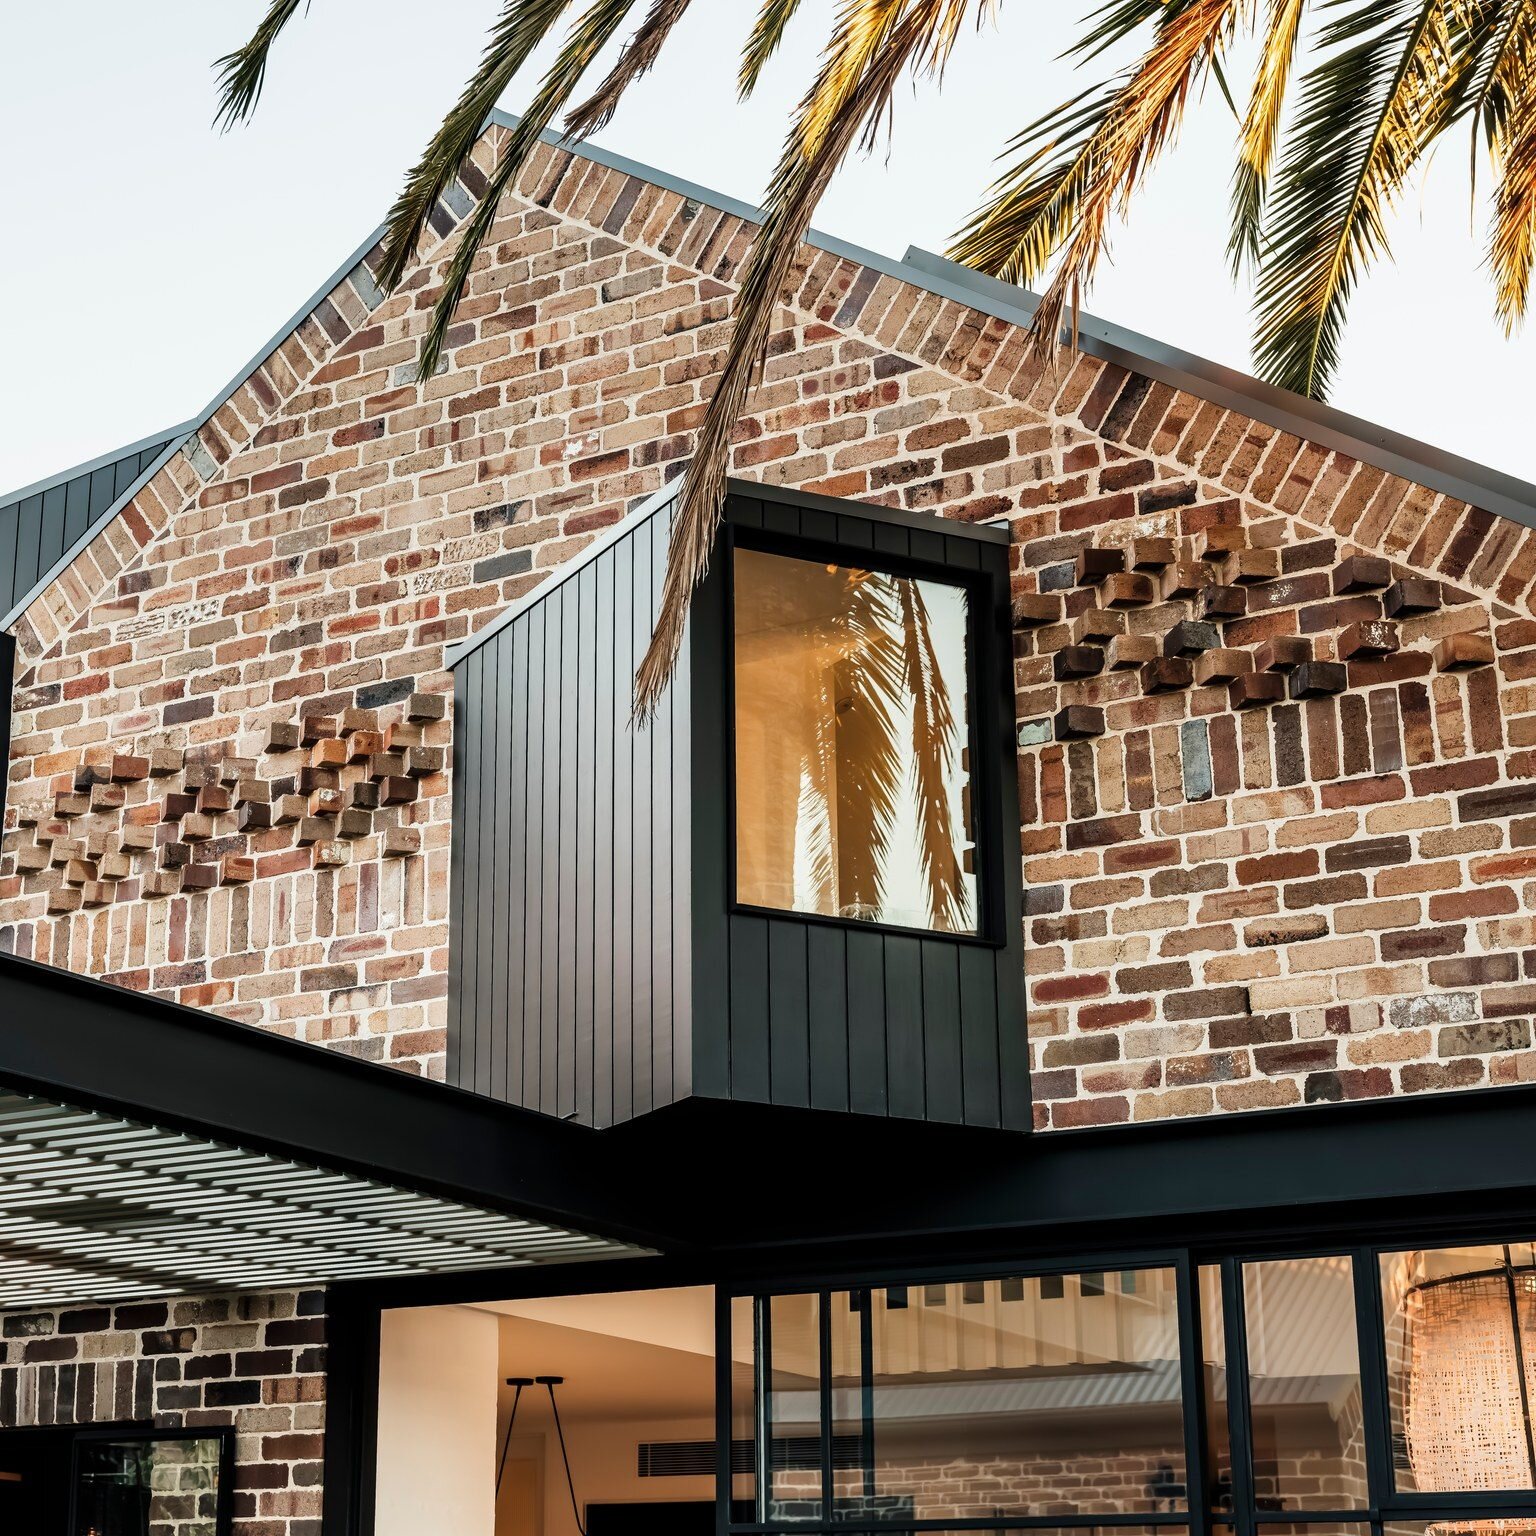 Today's post is about this beautiful project in Glebe using LOHAS Recycle Bricks

Architects: Kate Mountstephens, Burmah Constructions

At LOHAS Australia, the reuse and recycling of handpicked existing materials allow us to produce and supply premiu